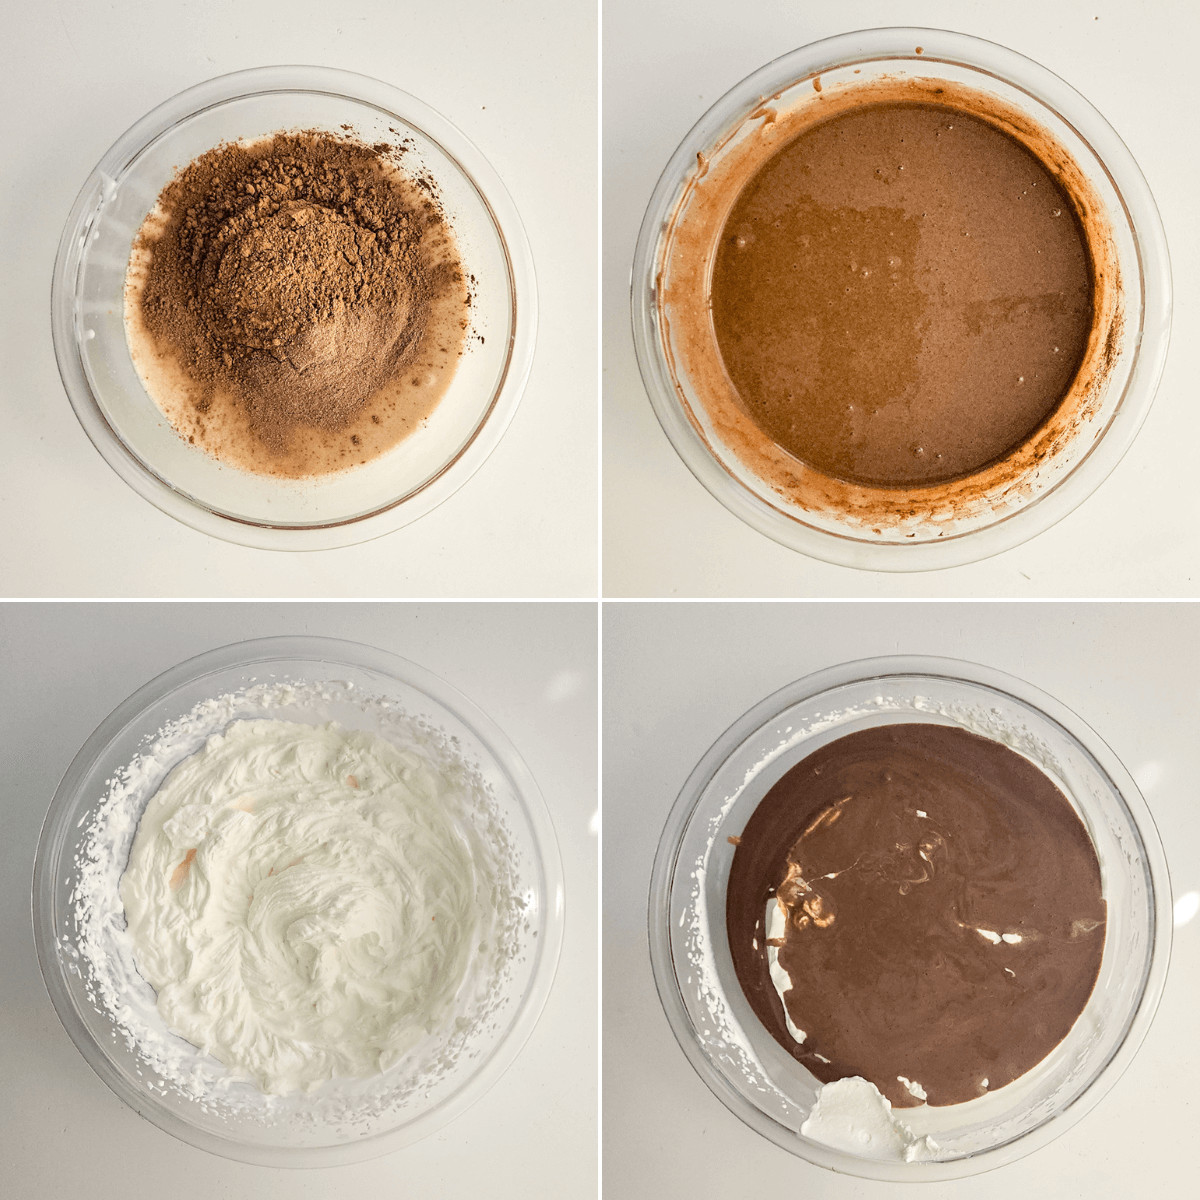 Four photos illustrating the steps to prepare a rich and luscious chocolate mousse, featuring an irresistible combination of cocoa, cream, and delicate whipped eggs.